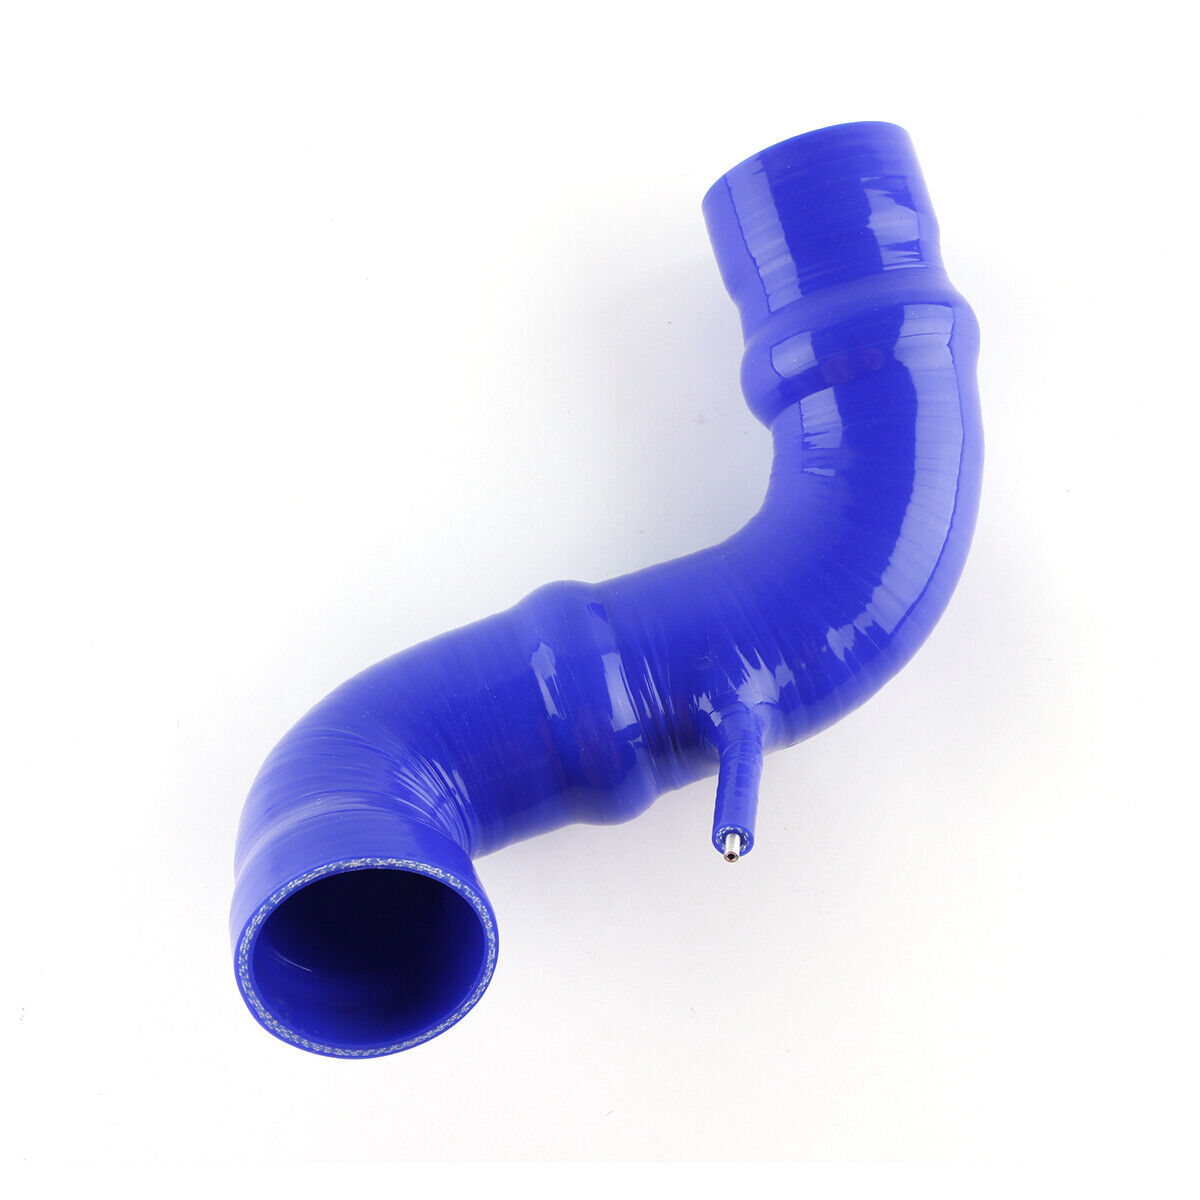 For SAAB 9-3 9-3X 2004-2011 Silicone Intake Air Cleaner Filter Hose Kit Blue